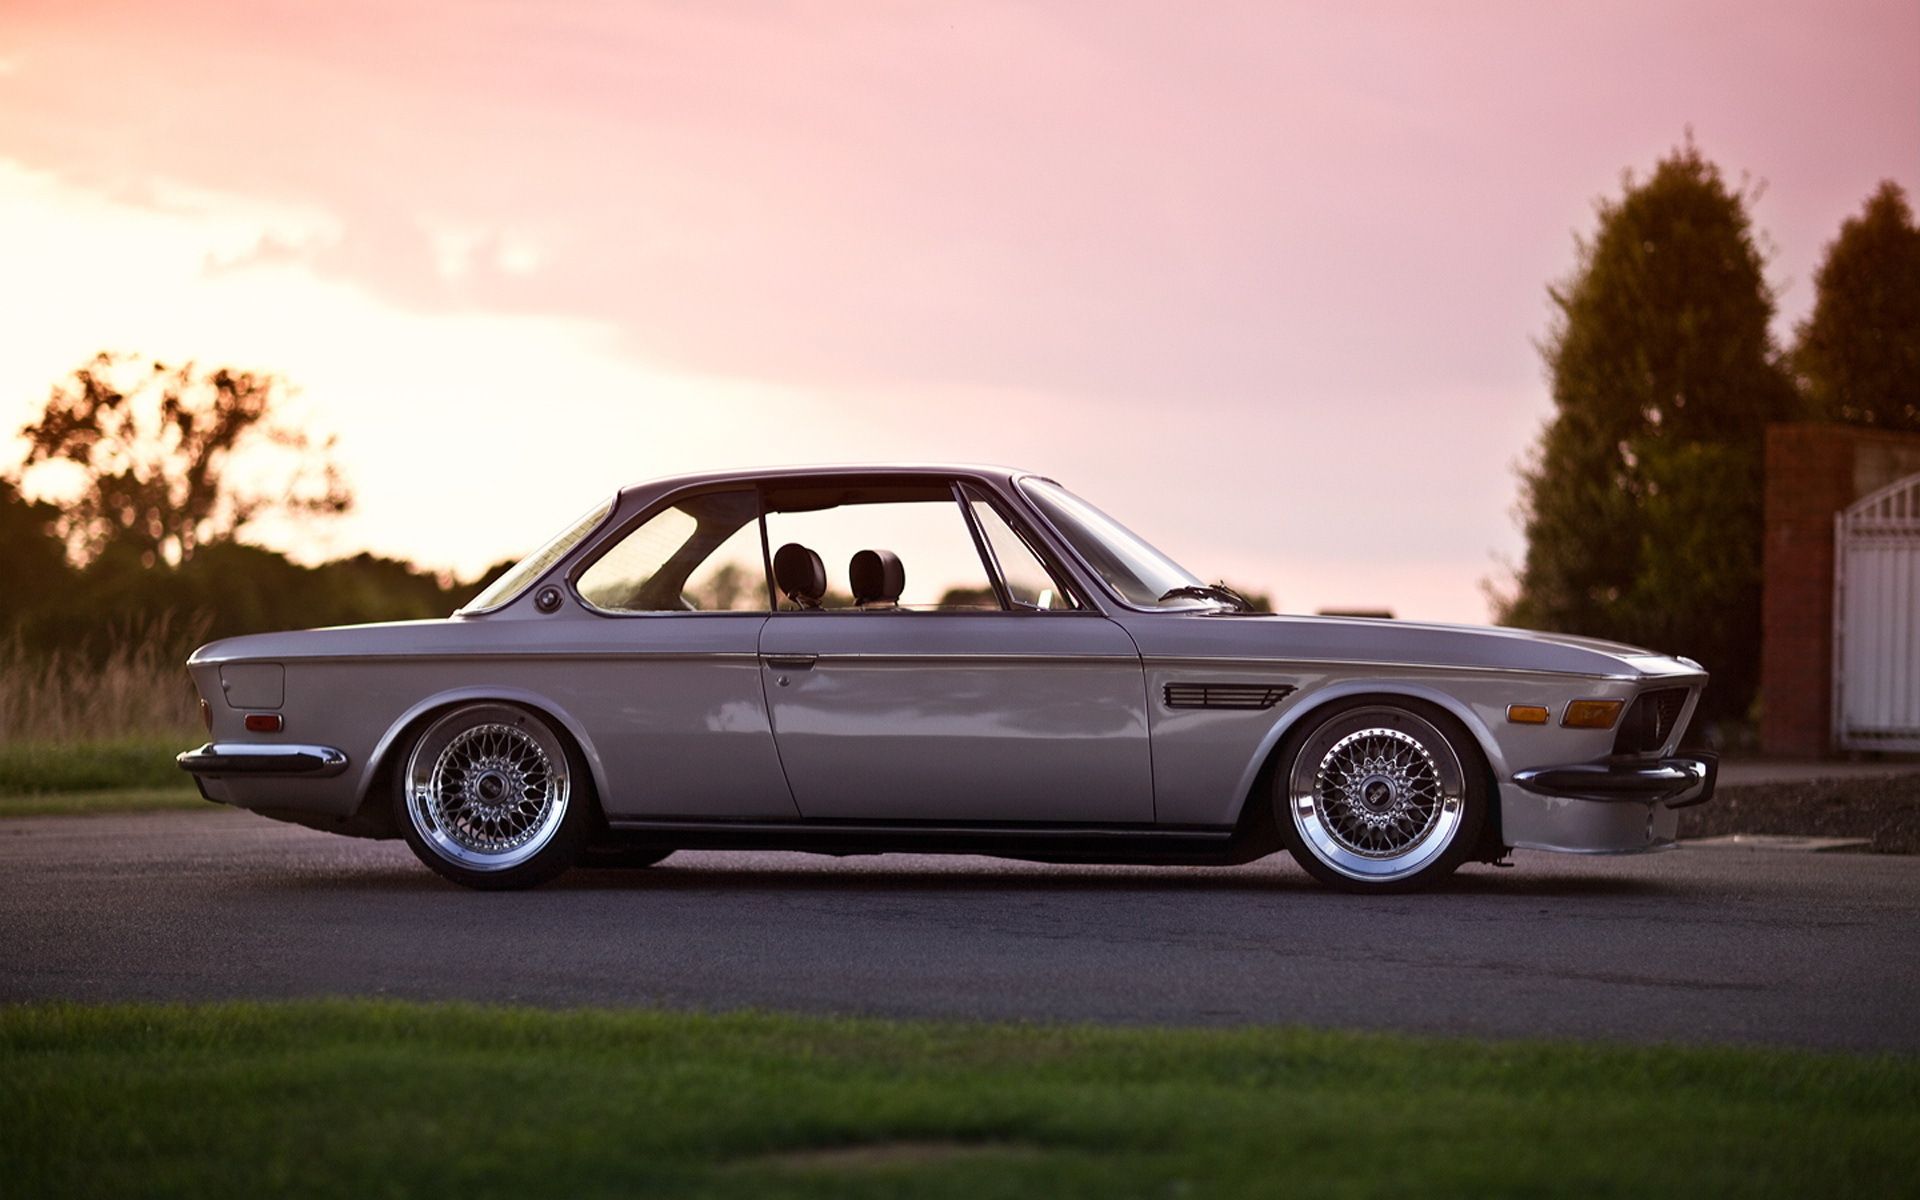 BMW E9 3.0 CS 1973 best designs and art from the internet